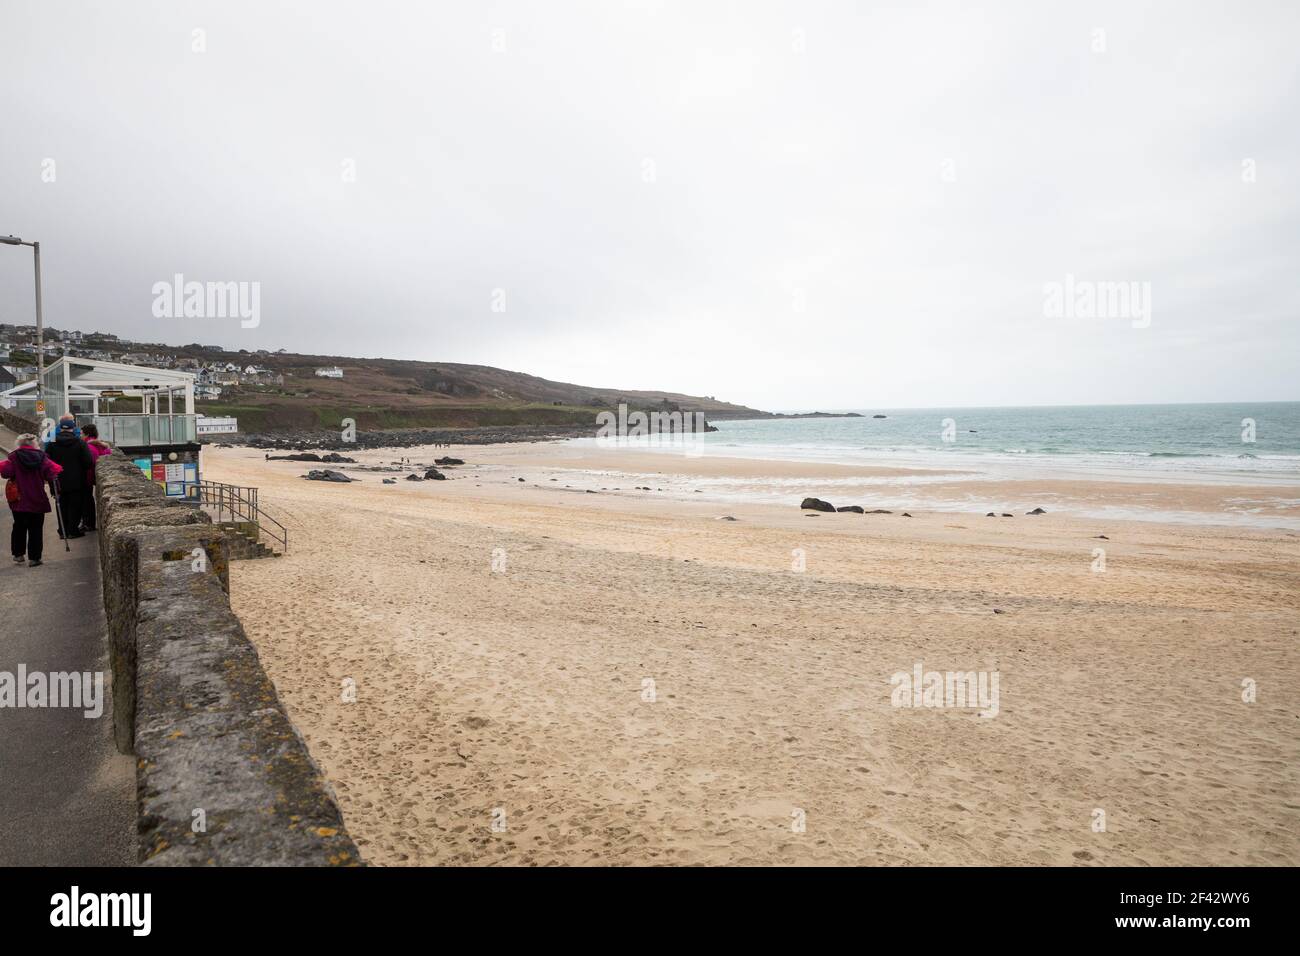 A view across Porthmeor Beach in St Ives, Cornwall, UK Stock Photo